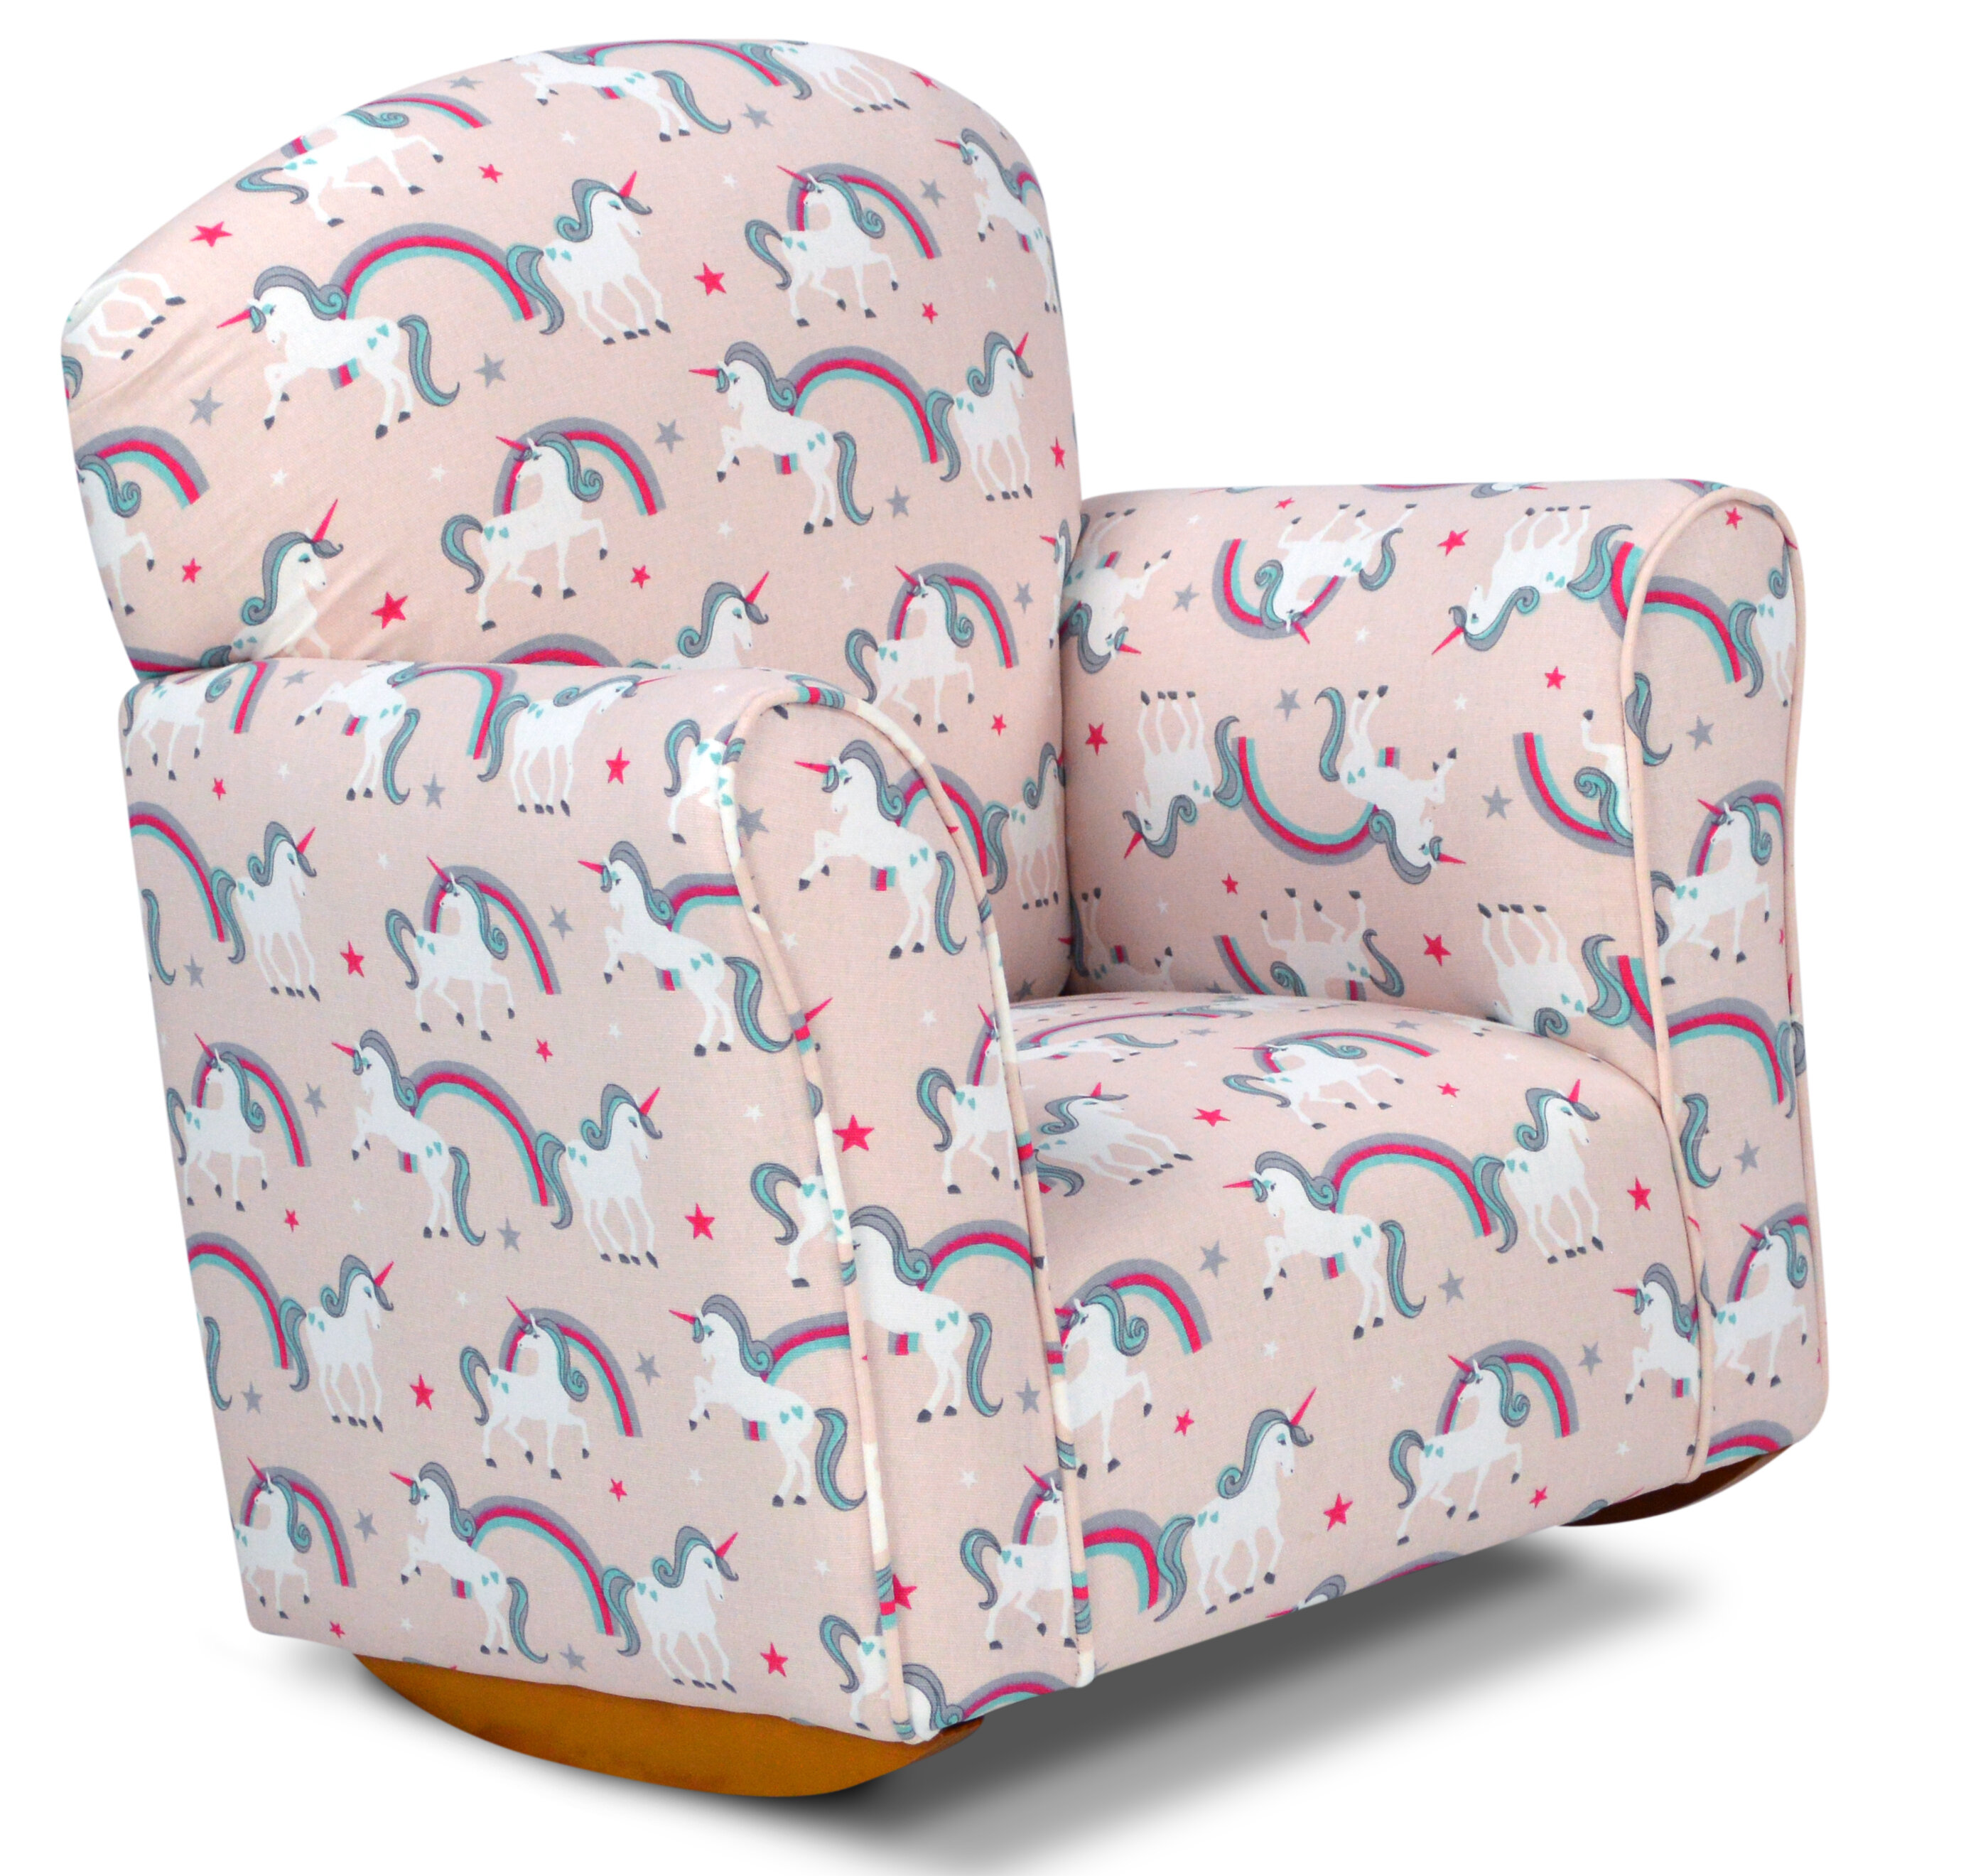 childrens upholstered chairs